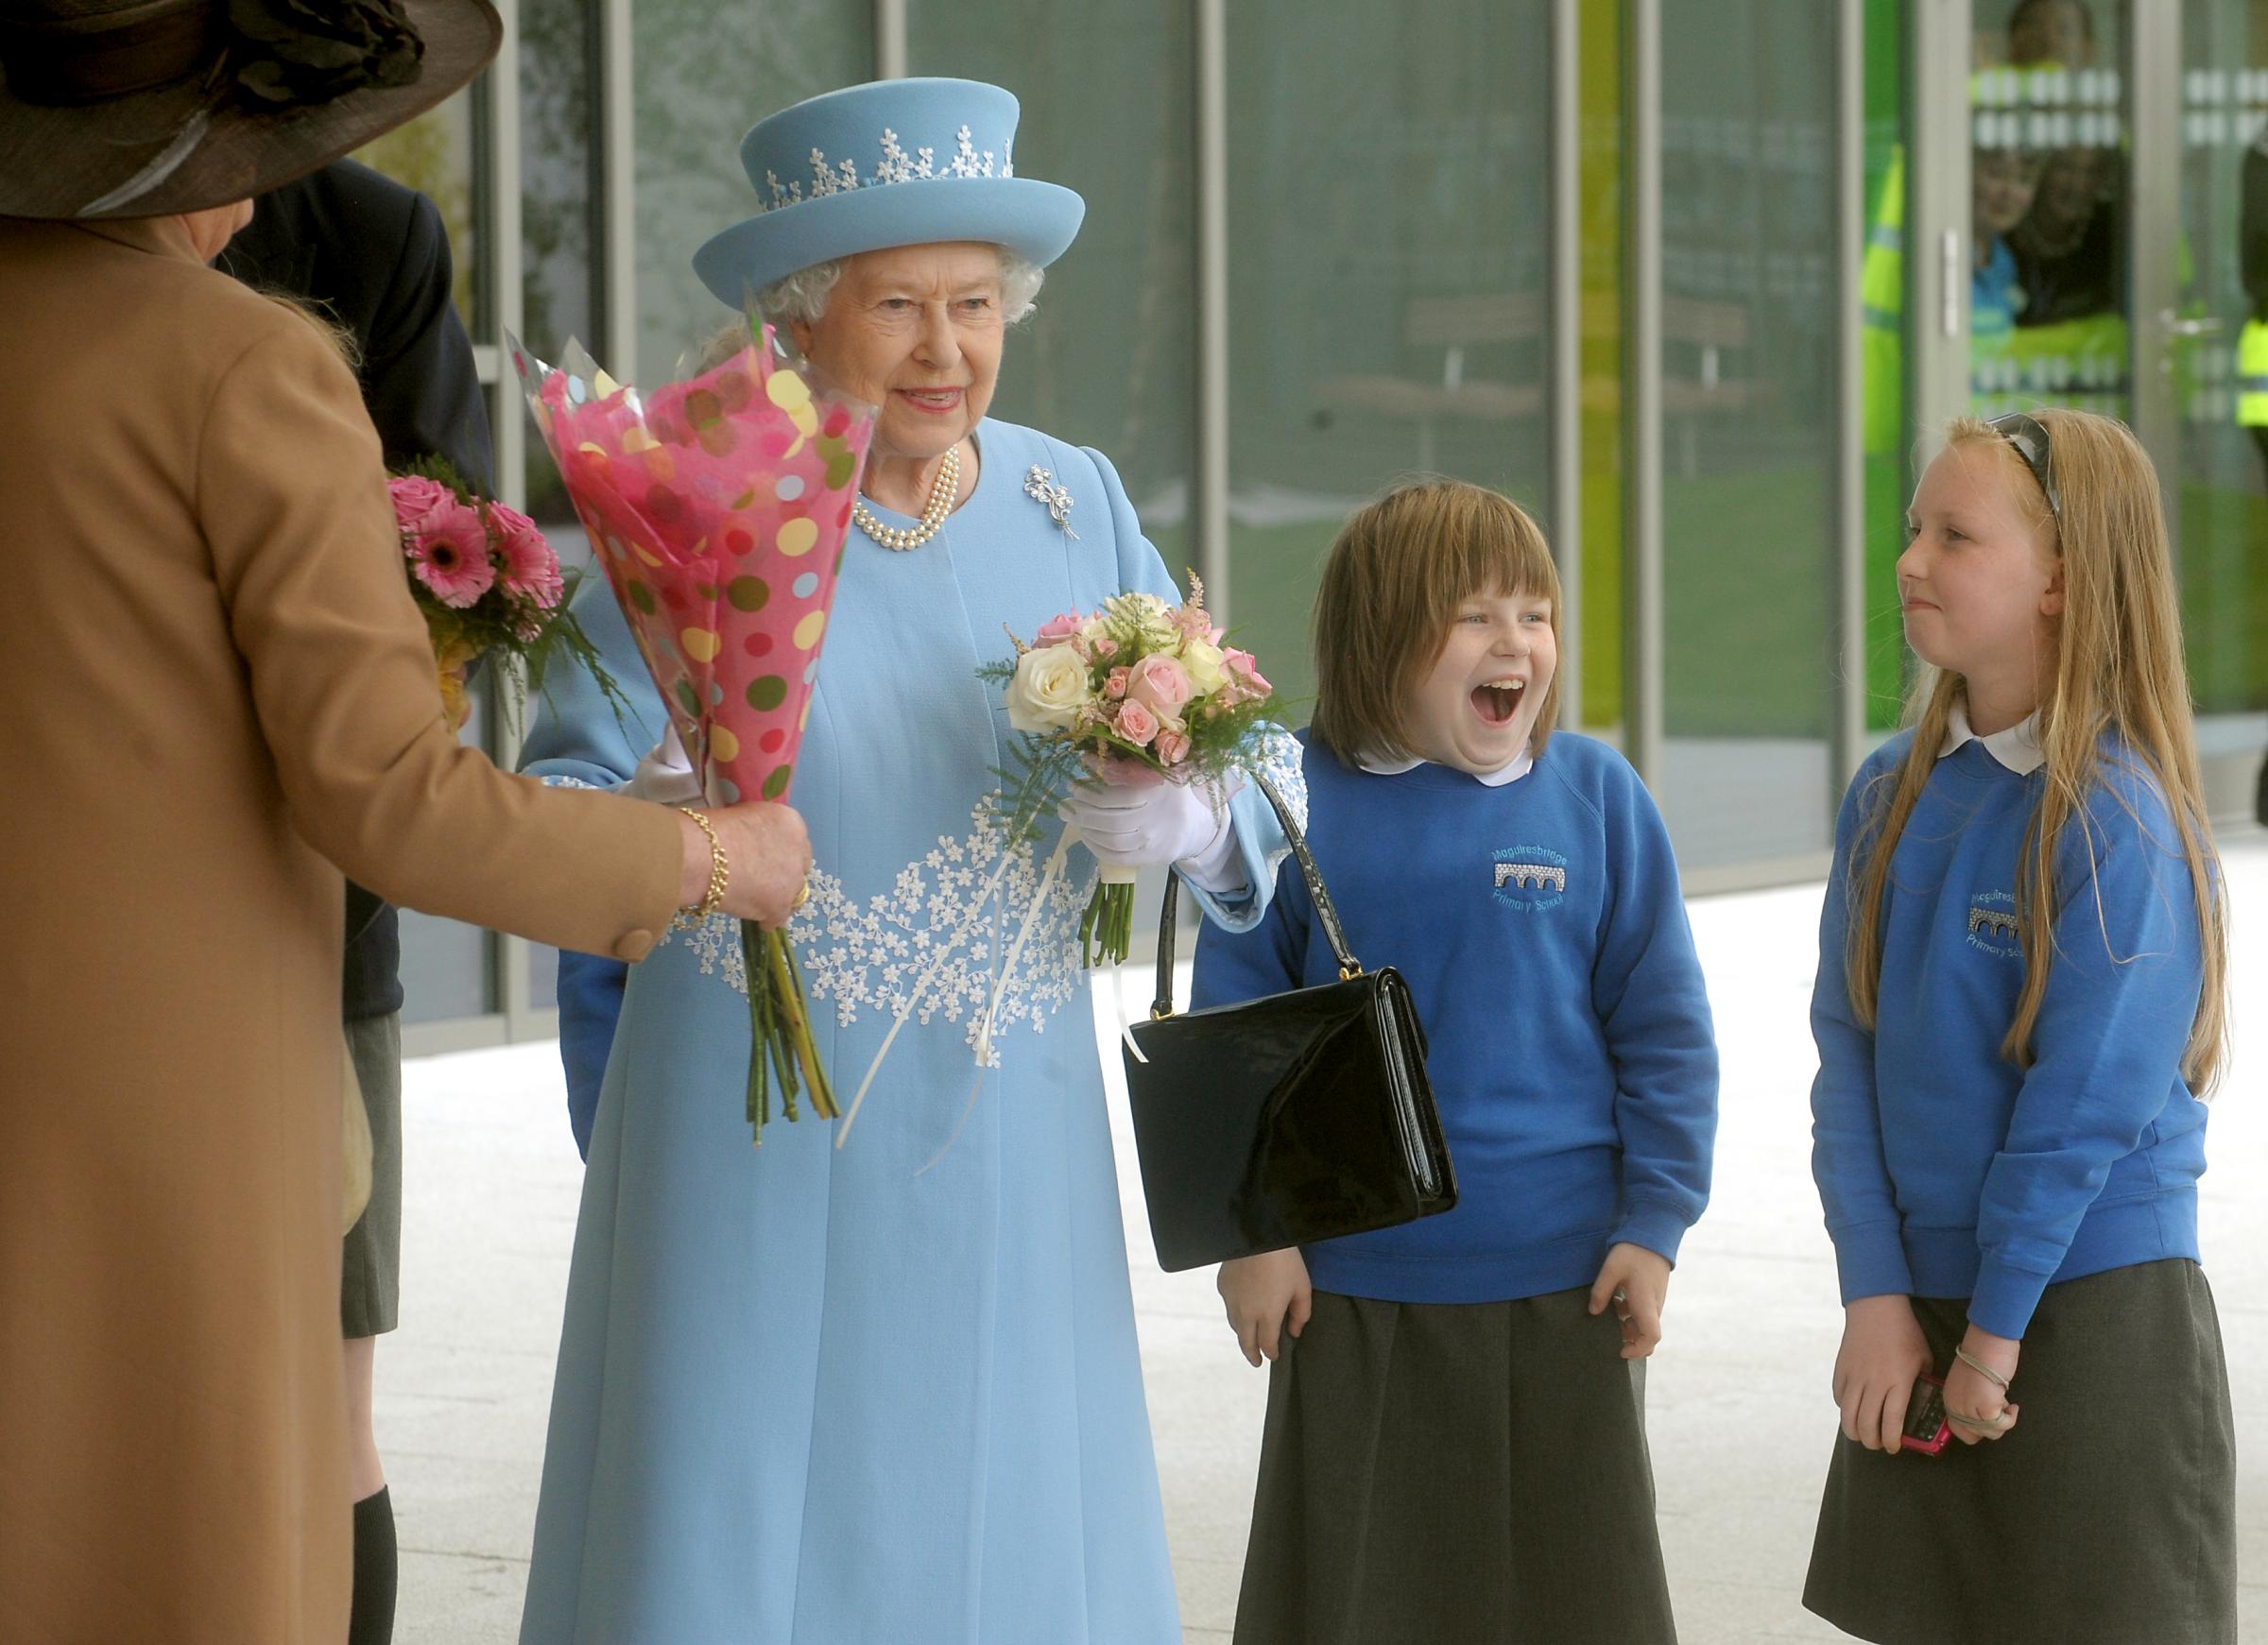 Queen Elizabeth during her visit to the official opening of South West Acute Hospital in 2012.